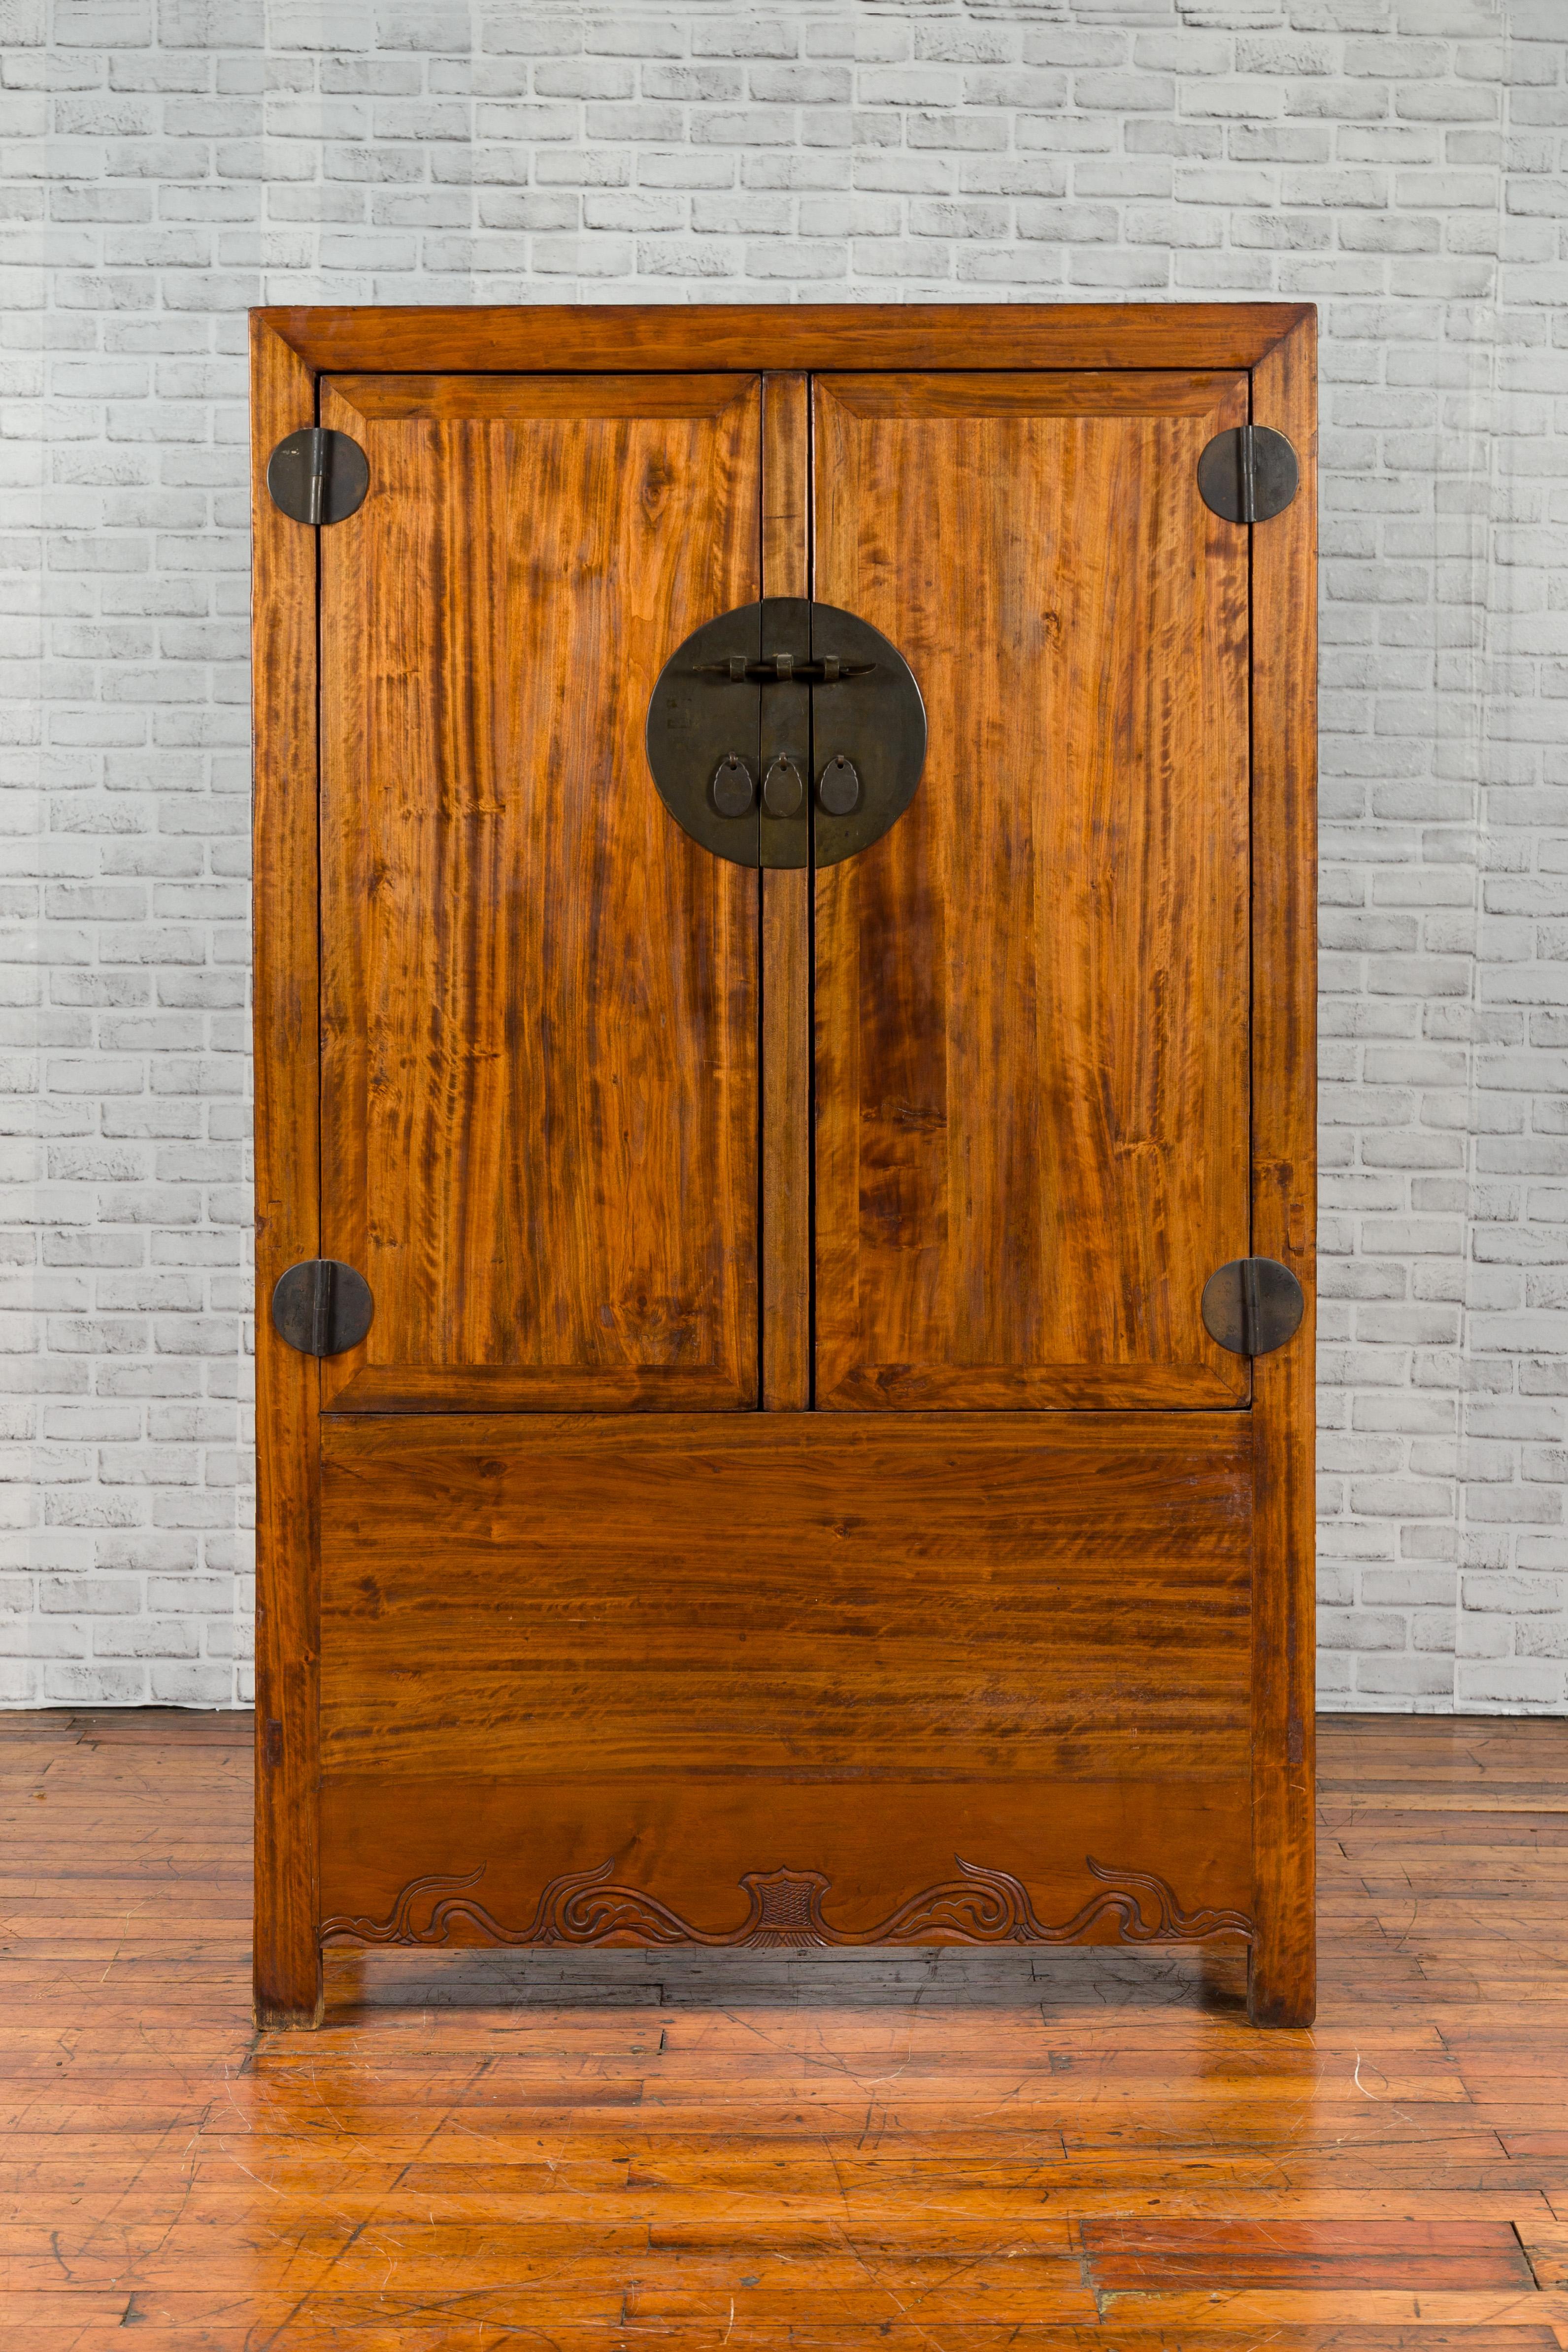 A Chinese Qing Dynasty period cabinet from the 19th century, with traditional hardware, two hidden drawers and a removable panel. Created in China during the Qing Dynasty, this wooden cabinet features two doors fitted with a large round medallion,